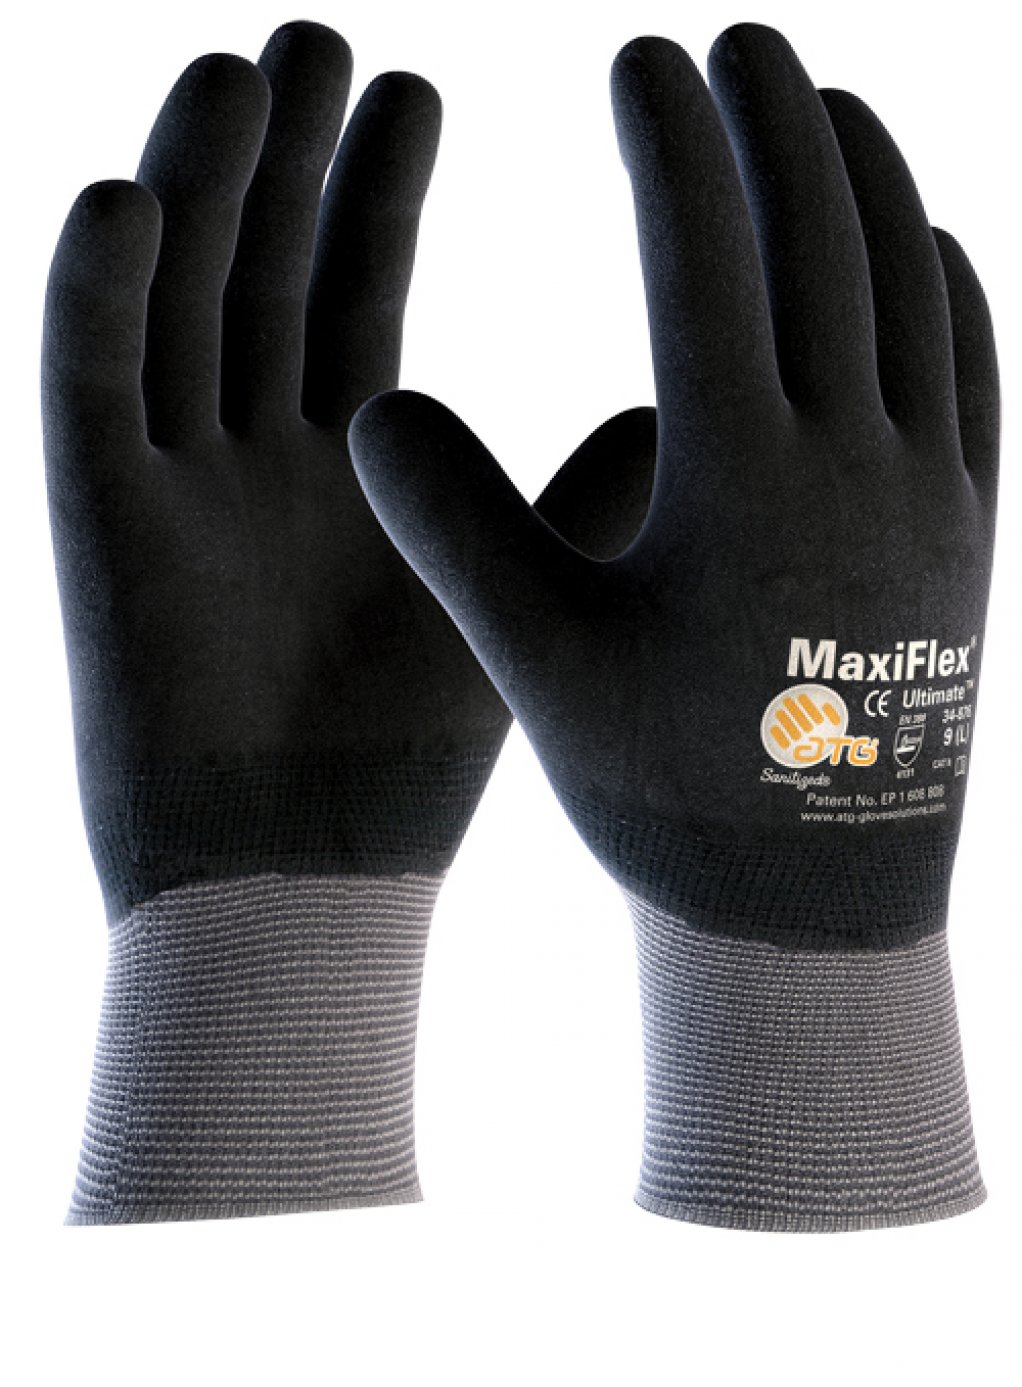 GLOVE SOLUTIONS AFRICA
Hand injuries are still the main injury sustained by mineworkers on site
